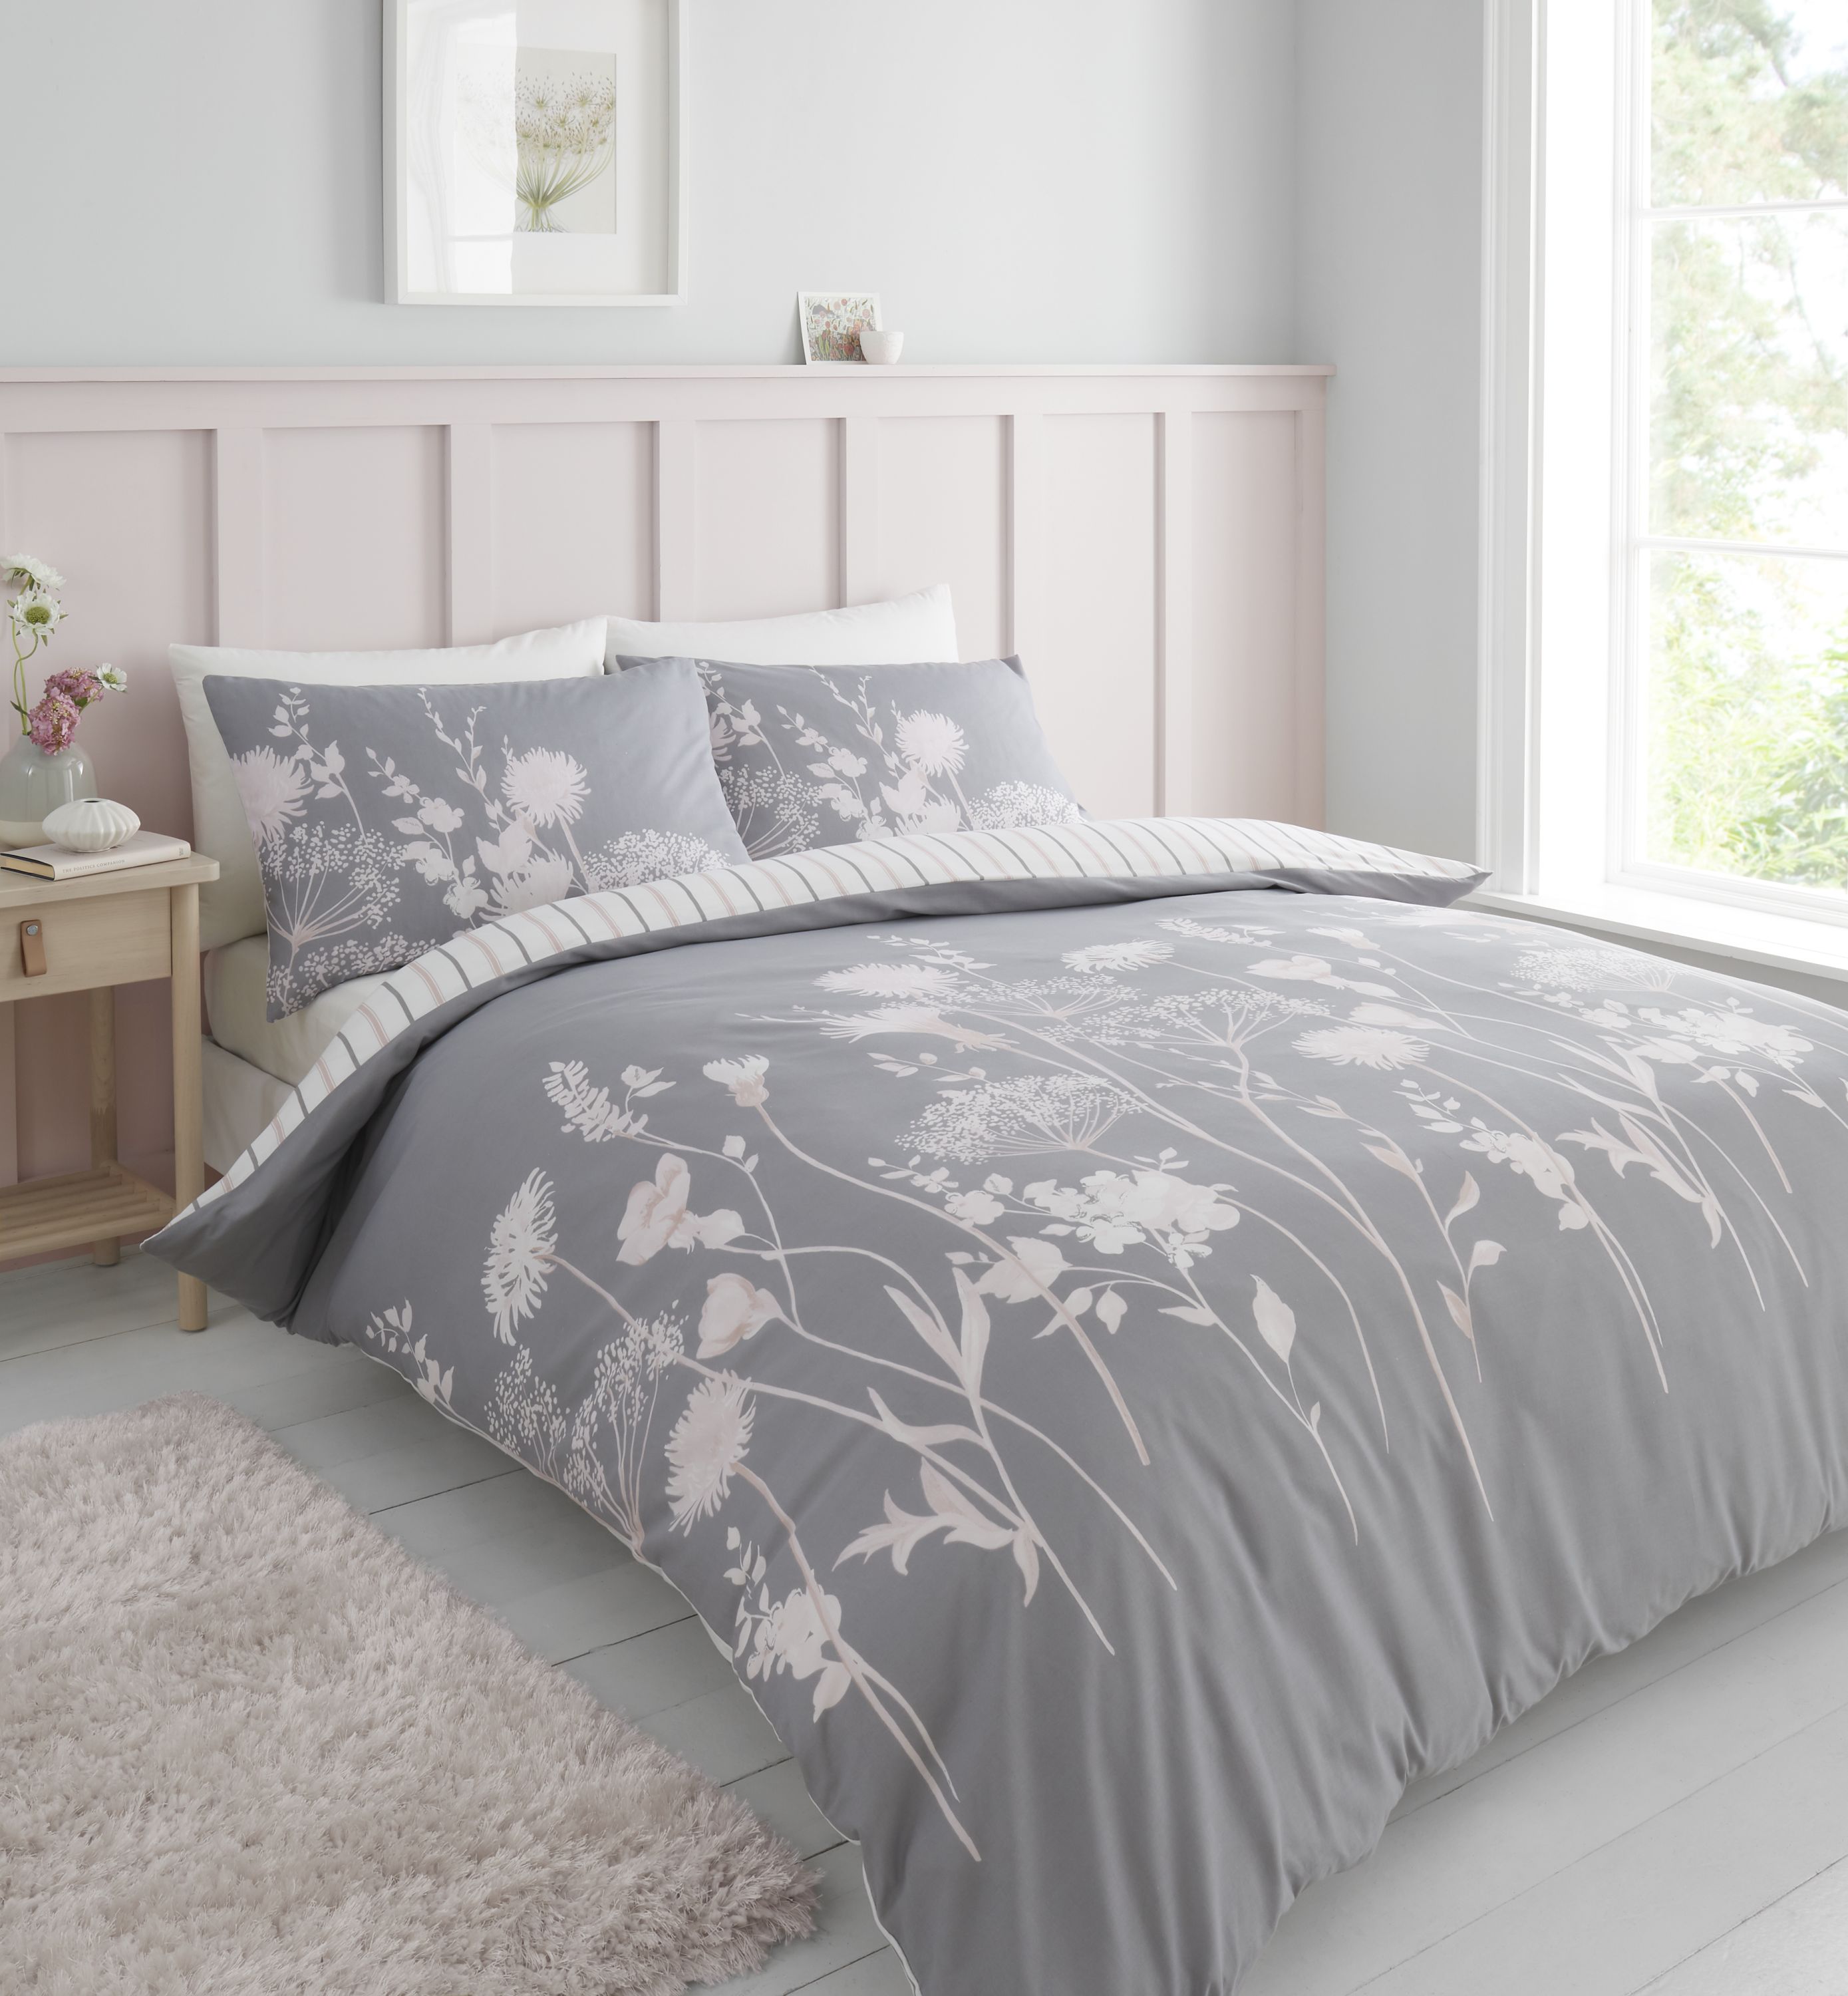 Catherine Lansfield Meadowsweet Floral Pink Duvet Cover And Pillowcase Set Grey